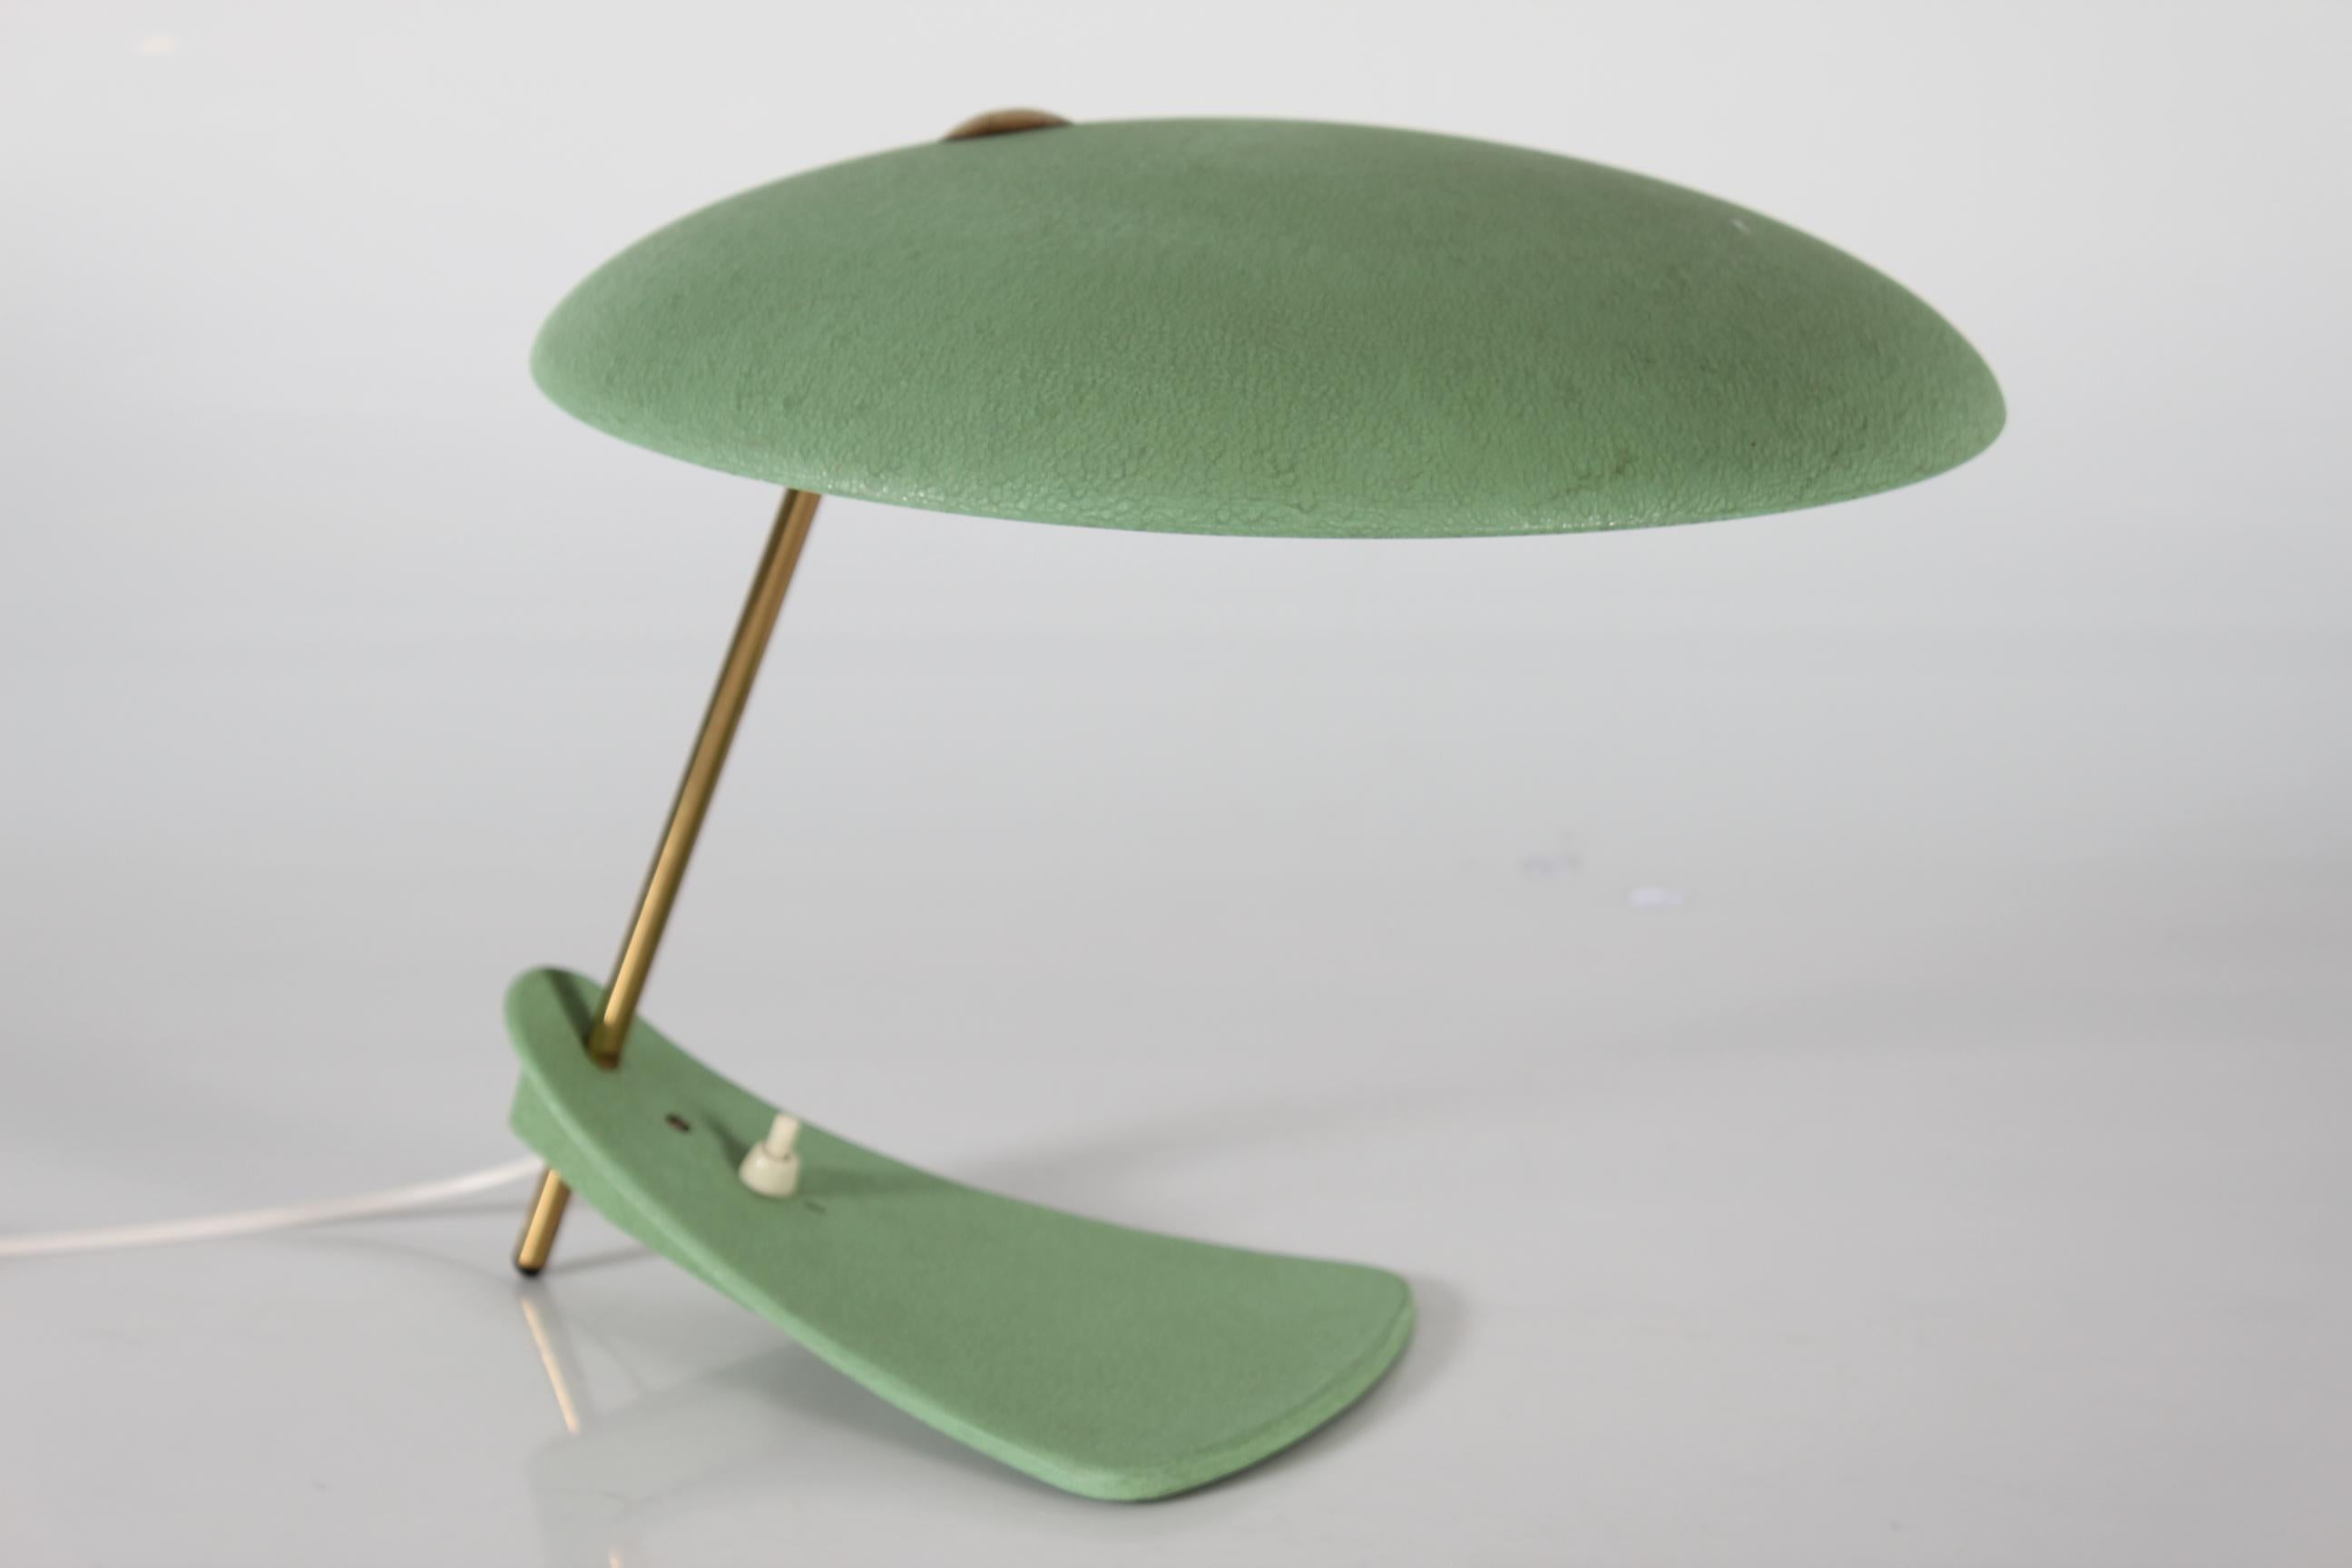 Italian Stilnovo style ufo table lamp with wrinkle dusty green lacquer
The sculptural lamp has a surface of matte dusty leaf green finish lacquer.

Measurements: 
Height 32 cm
Length 40 cm
Shade diameter 35 cm

Very nice vintage condition